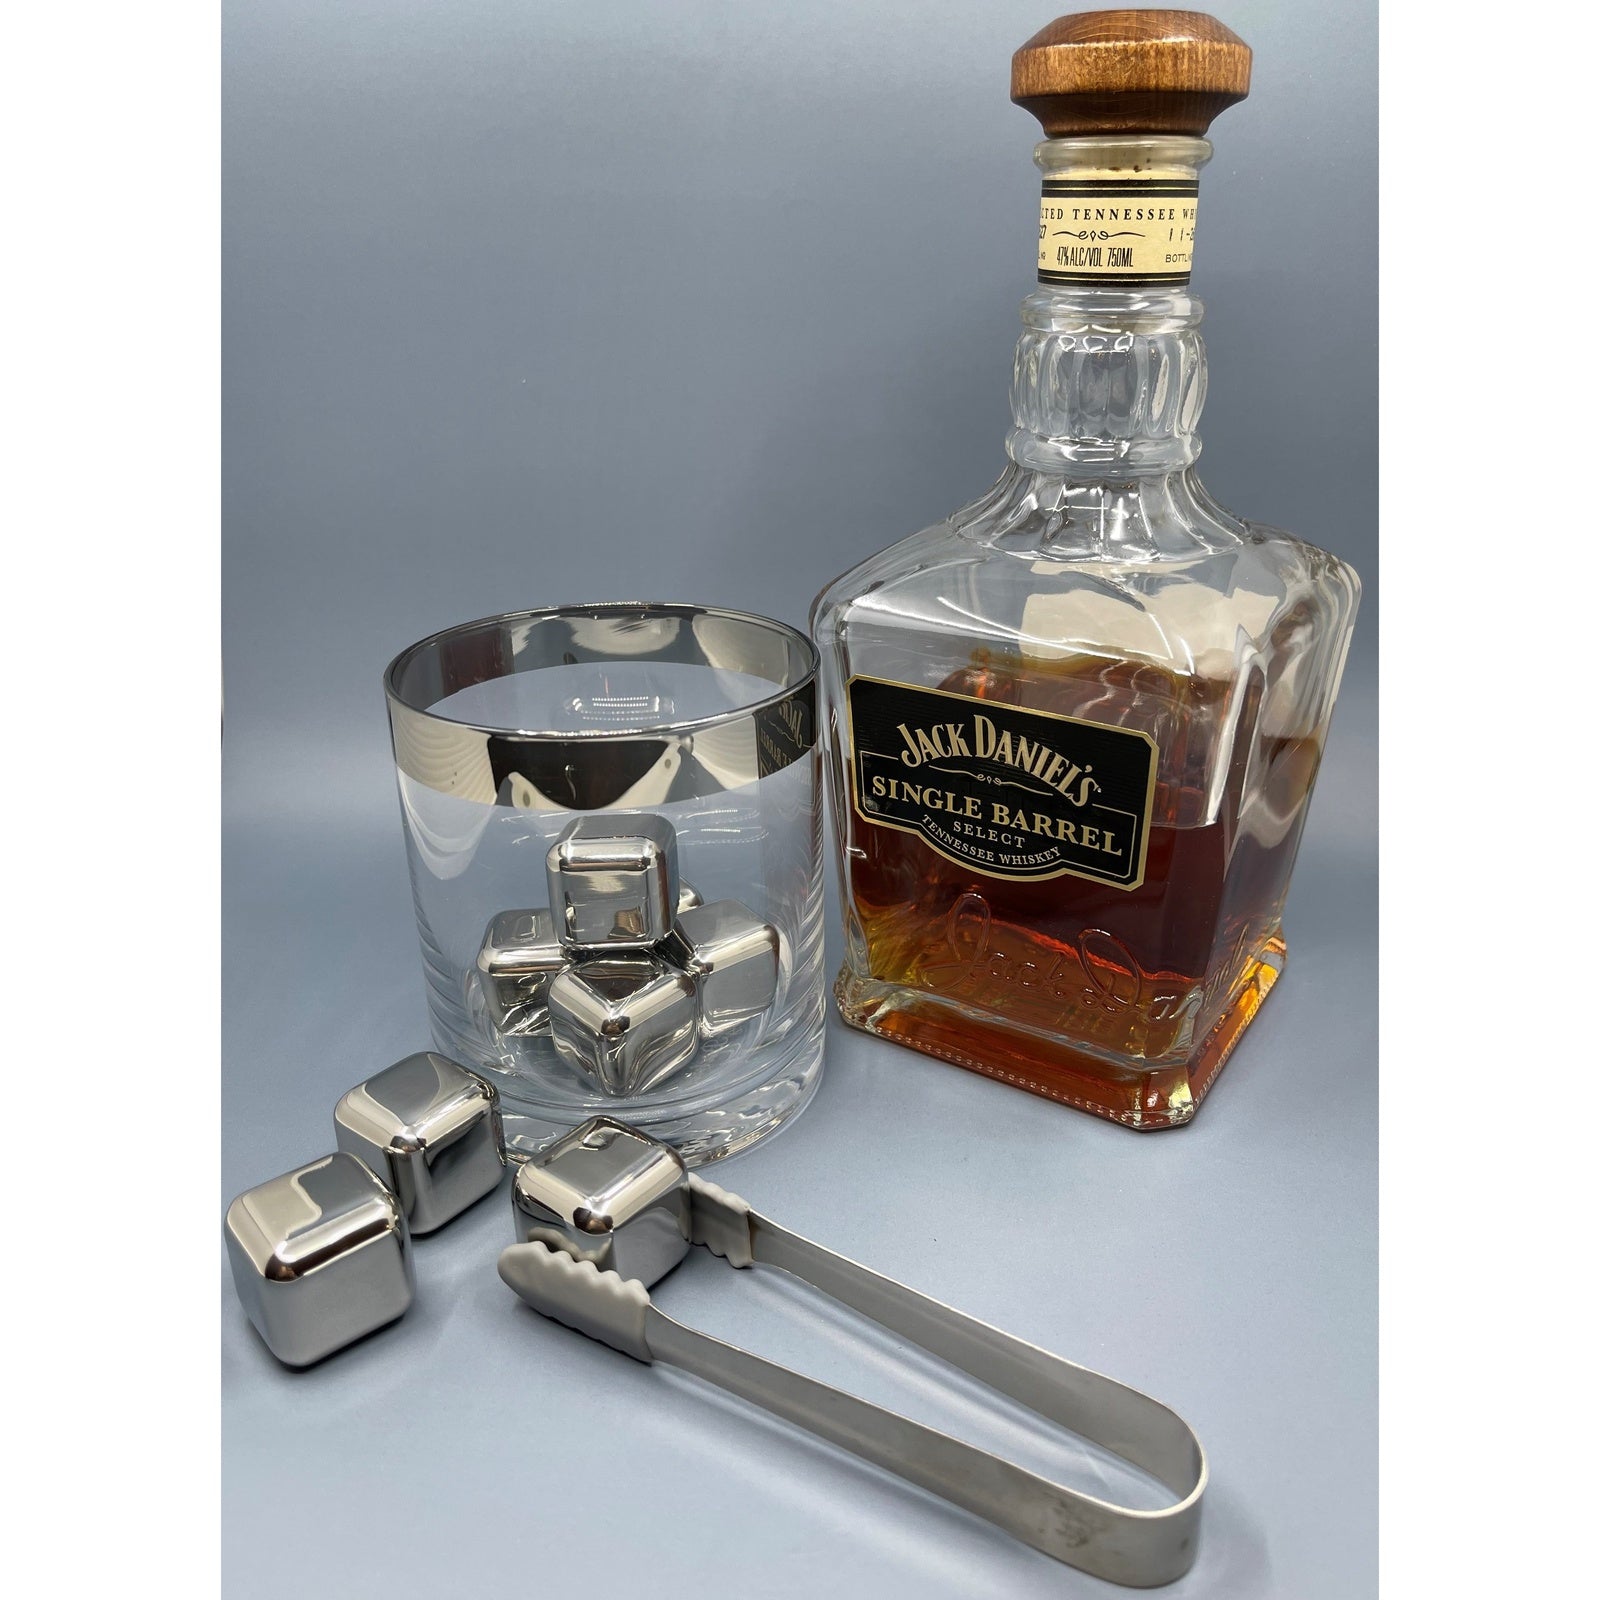 Stainless Steel whiskey chilling ice cubes 8 cube set